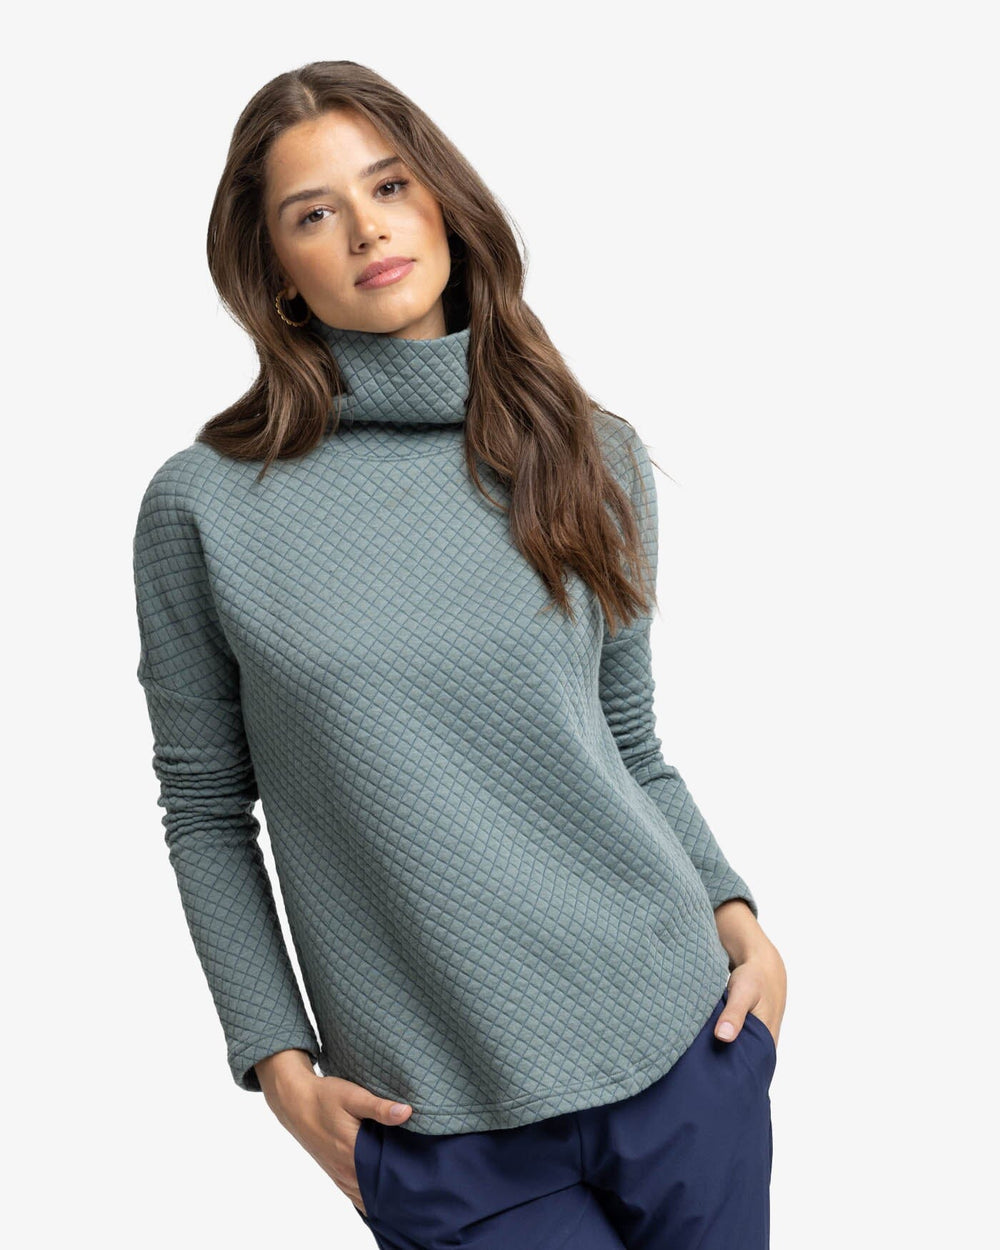 The second front view of the Southern Tide Mellie MockNeck Sweatshirt by Southern Tide - Balsam Green